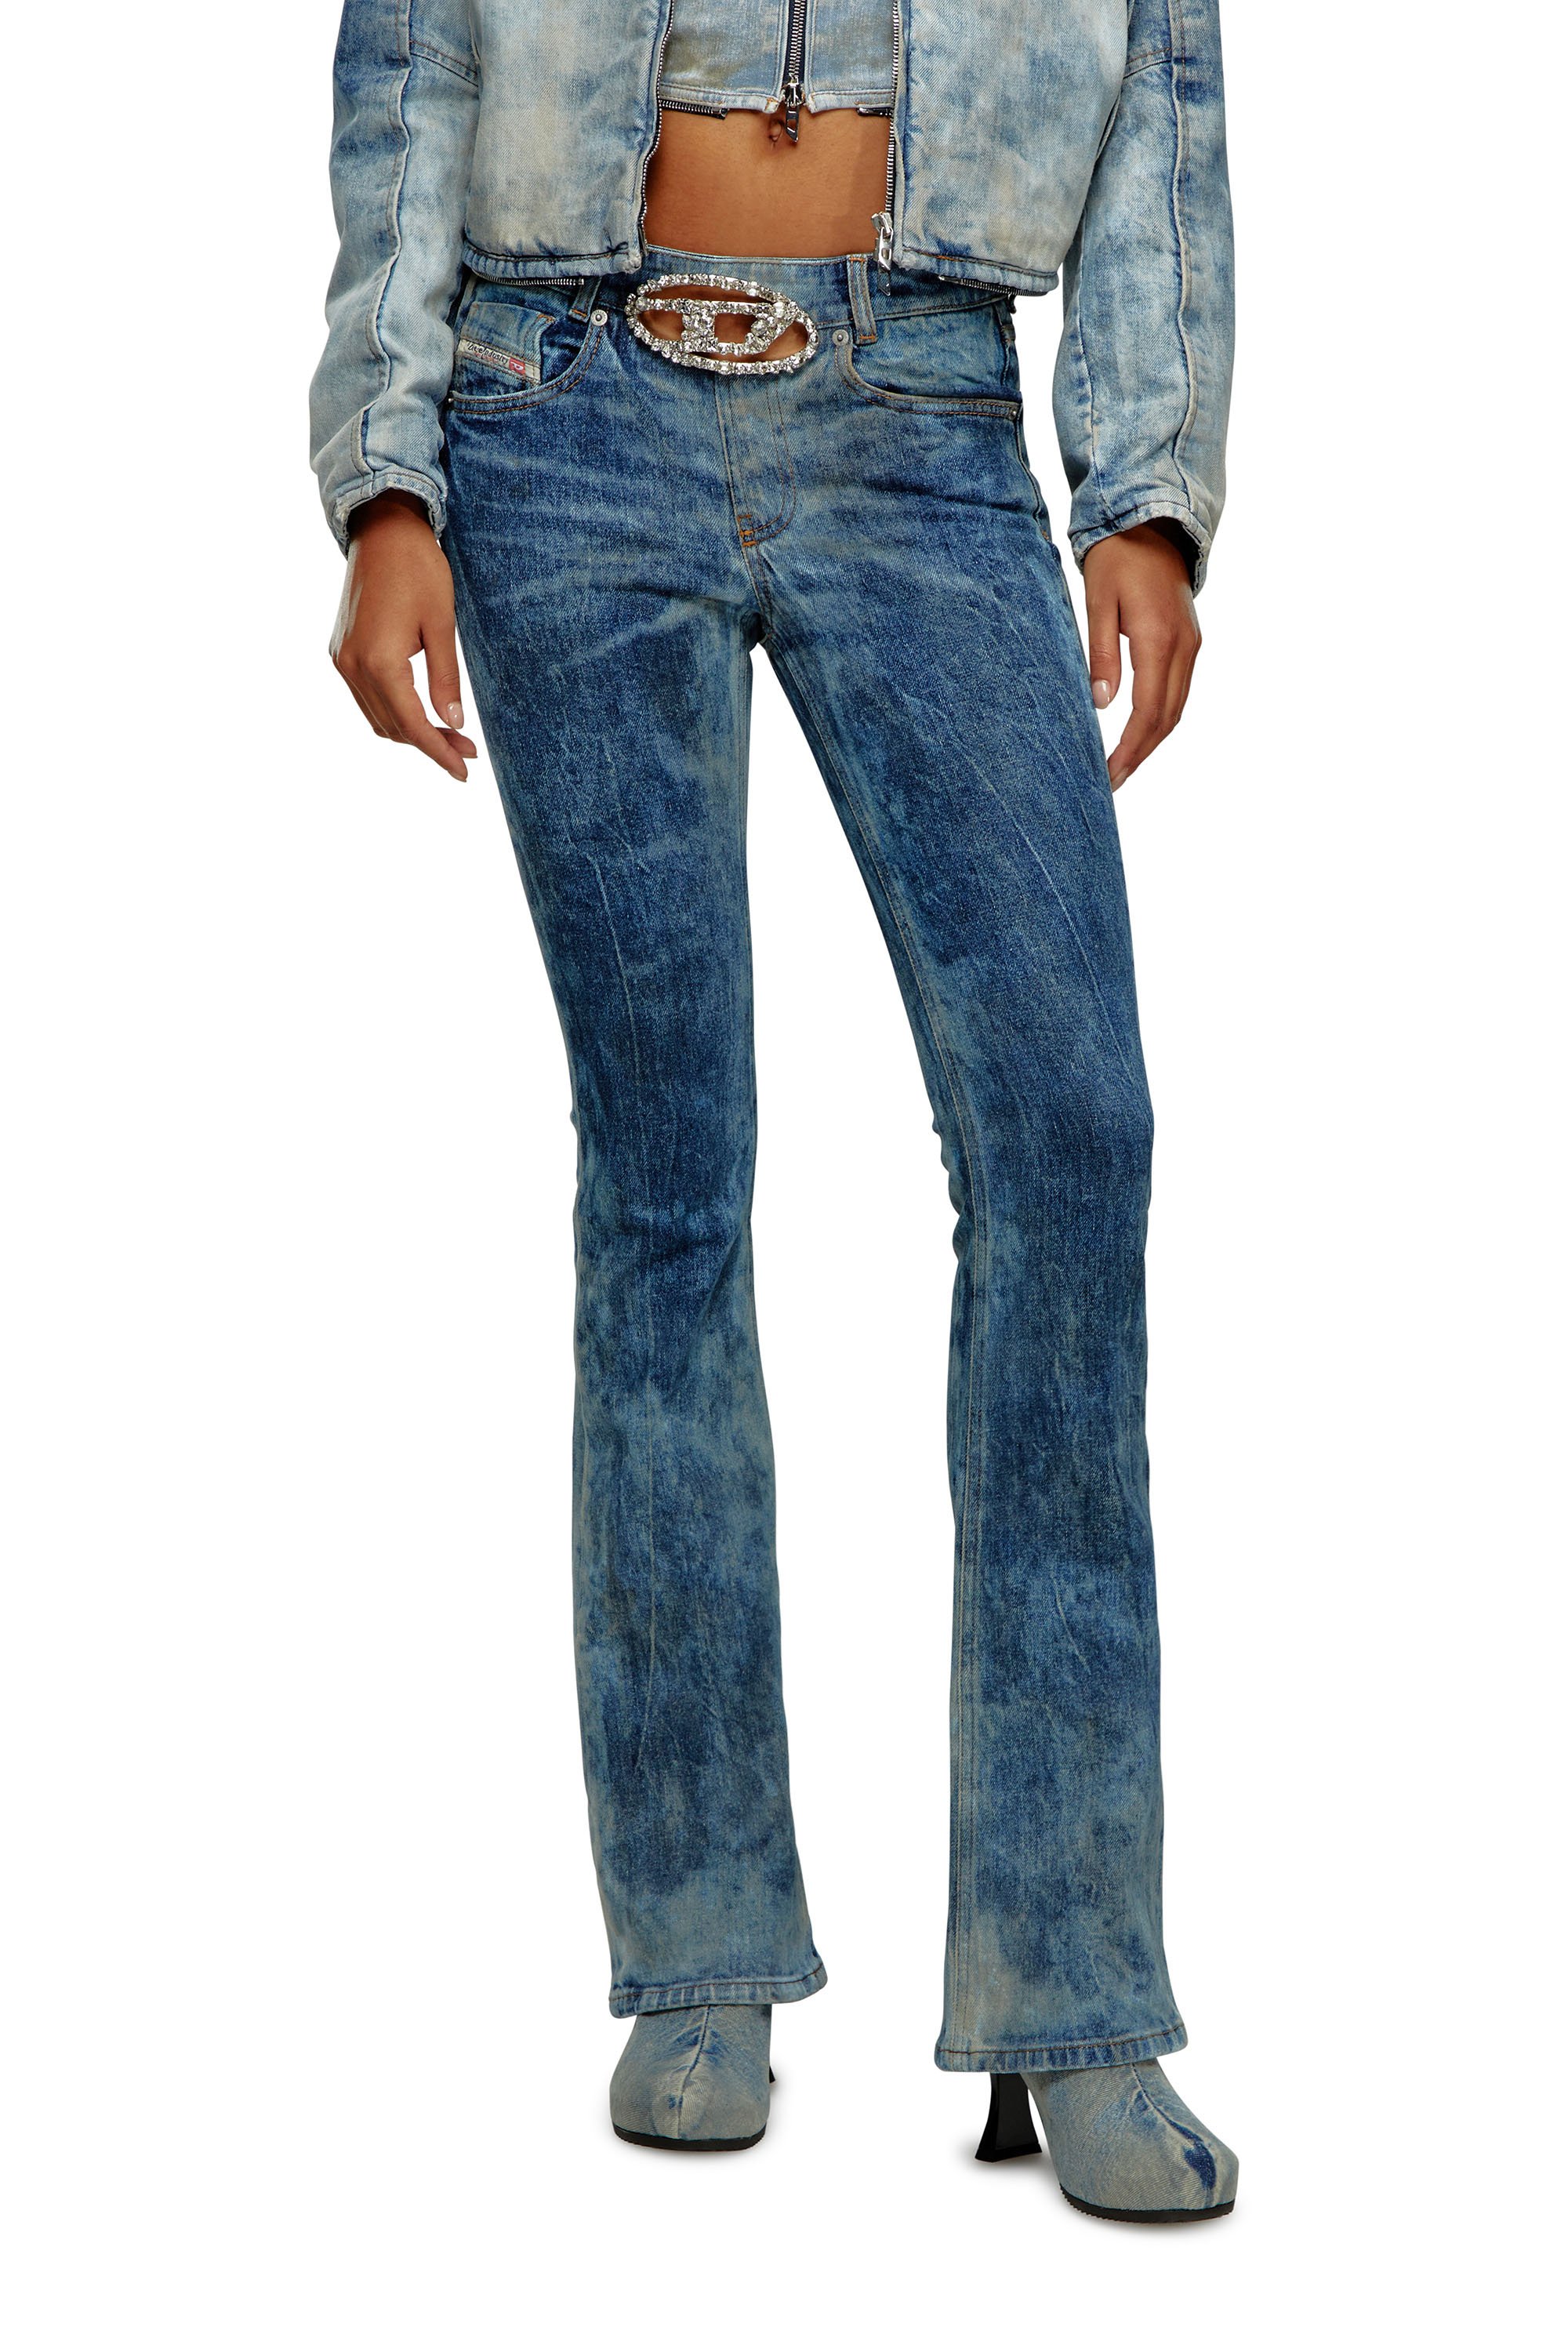 Diesel - Bootcut and Flare Jeans 1969 D-Ebbey 0PGAL, Mujer Bootcut y Flare Jeans - 1969 D-Ebbey in Azul marino - Image 2